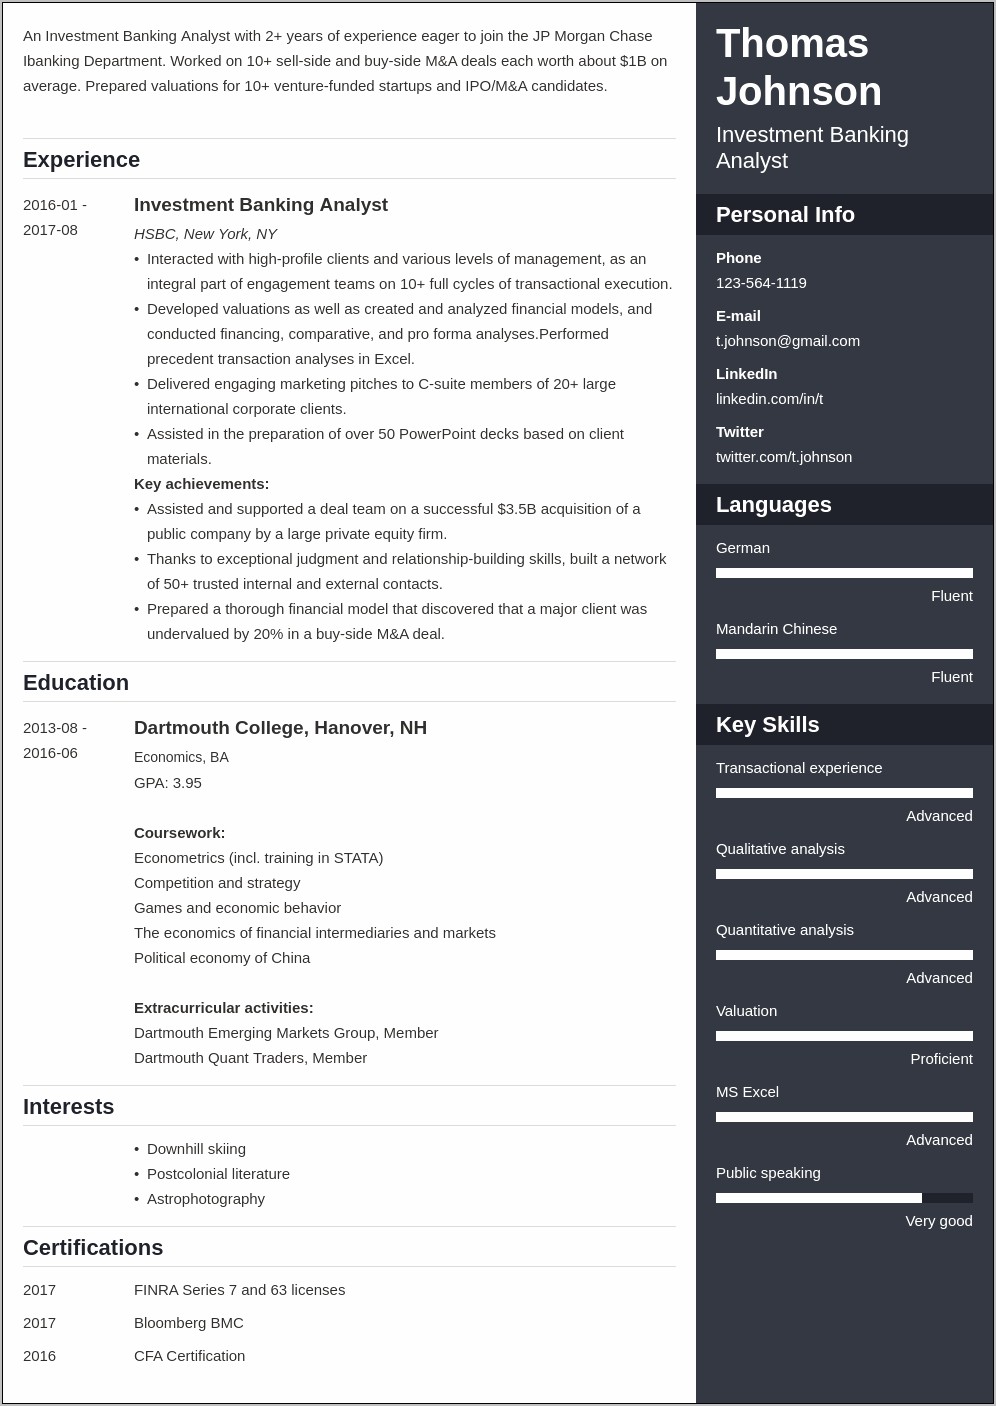 Resume Samples For Investment Banking